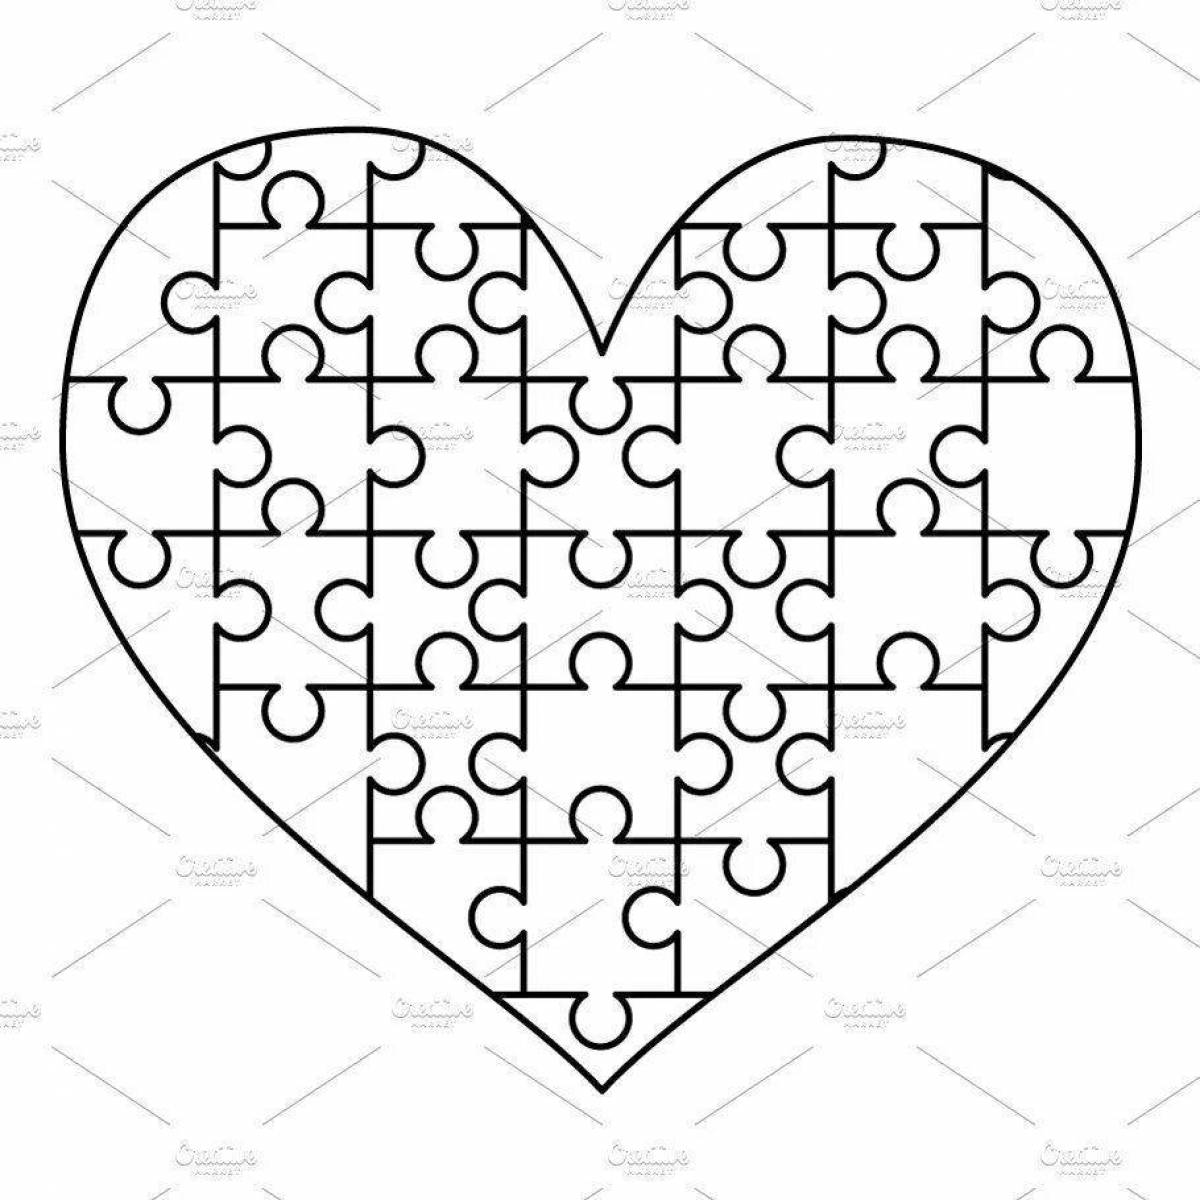 Fun coloring puzzle with heart